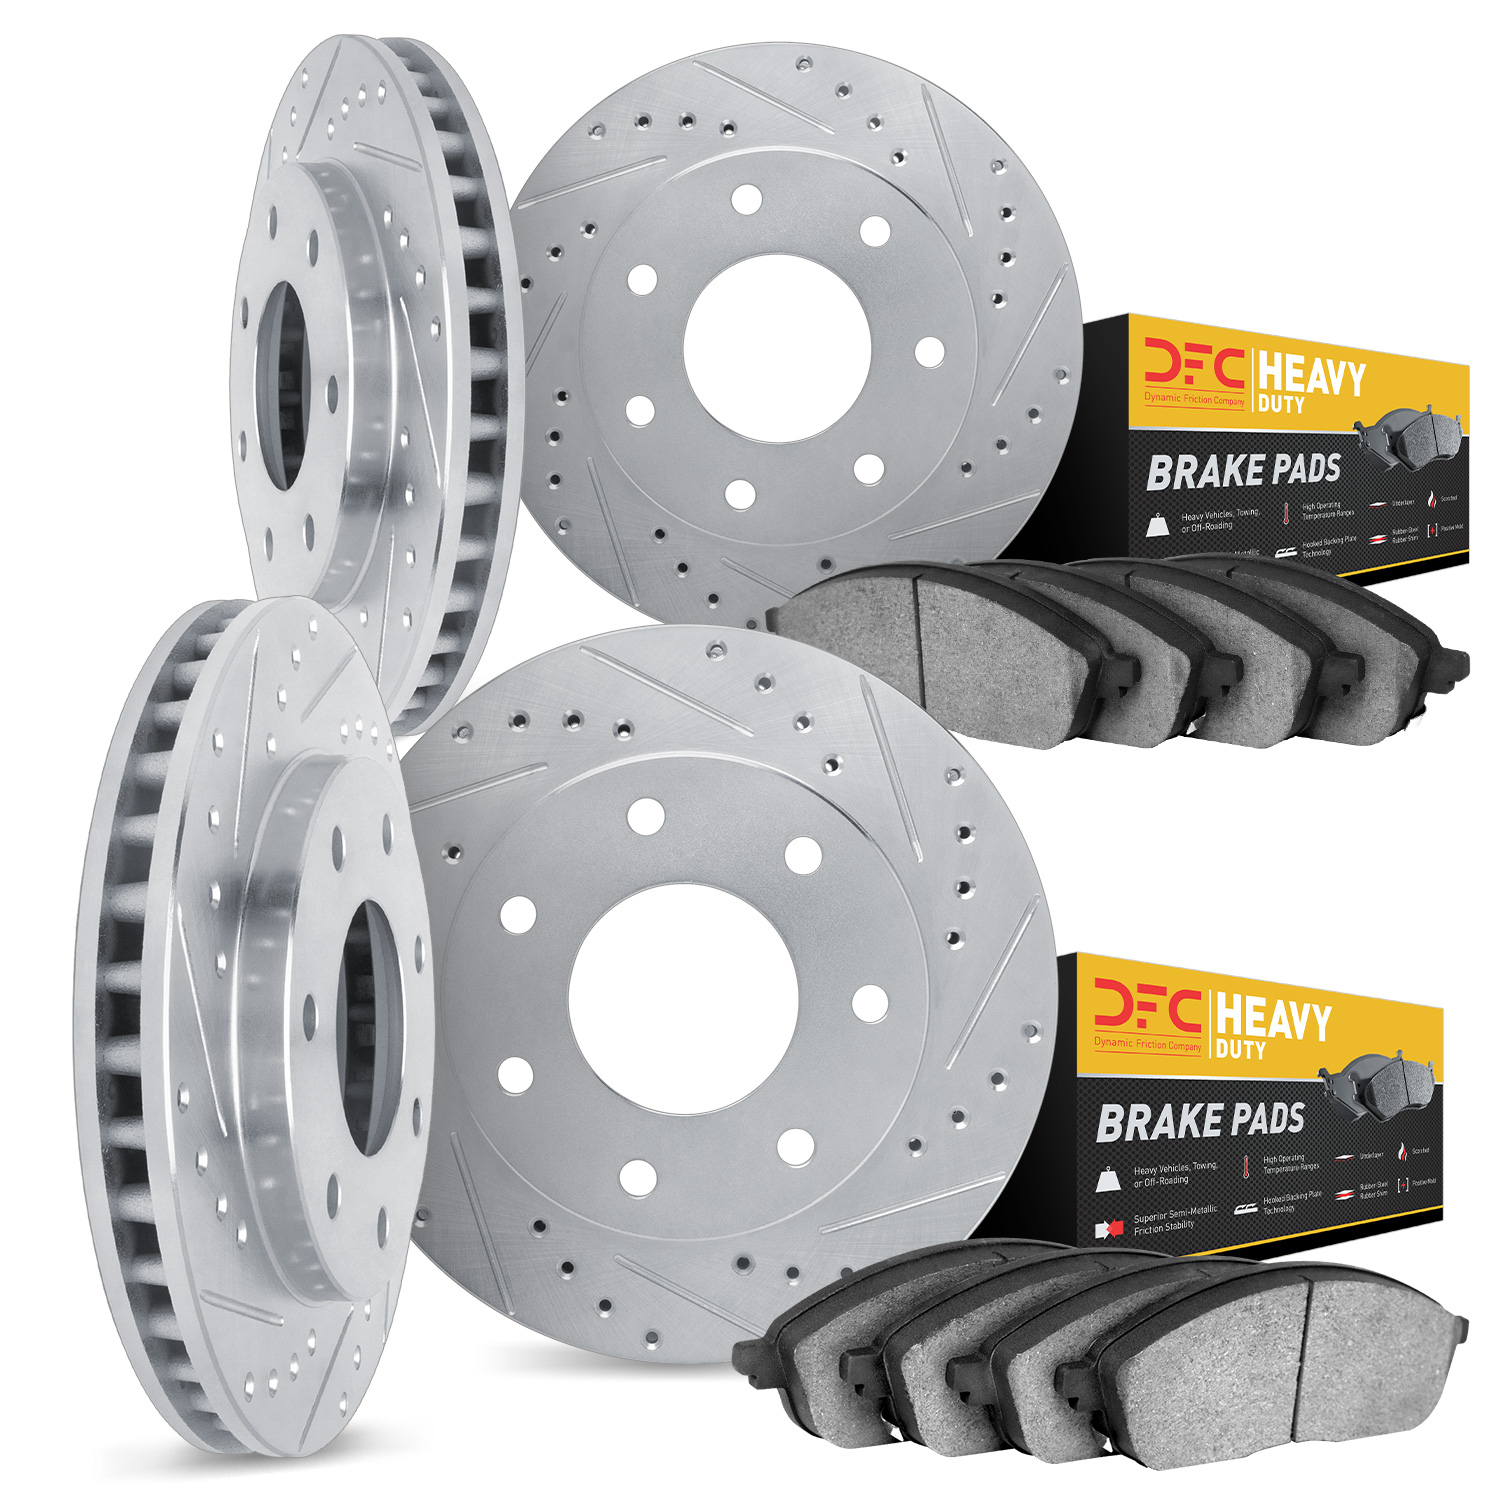 7204-54004 Drilled/Slotted Rotors w/Heavy-Duty Brake Pads Kit [Silver], 2012-2014 Ford/Lincoln/Mercury/Mazda, Position: Front an